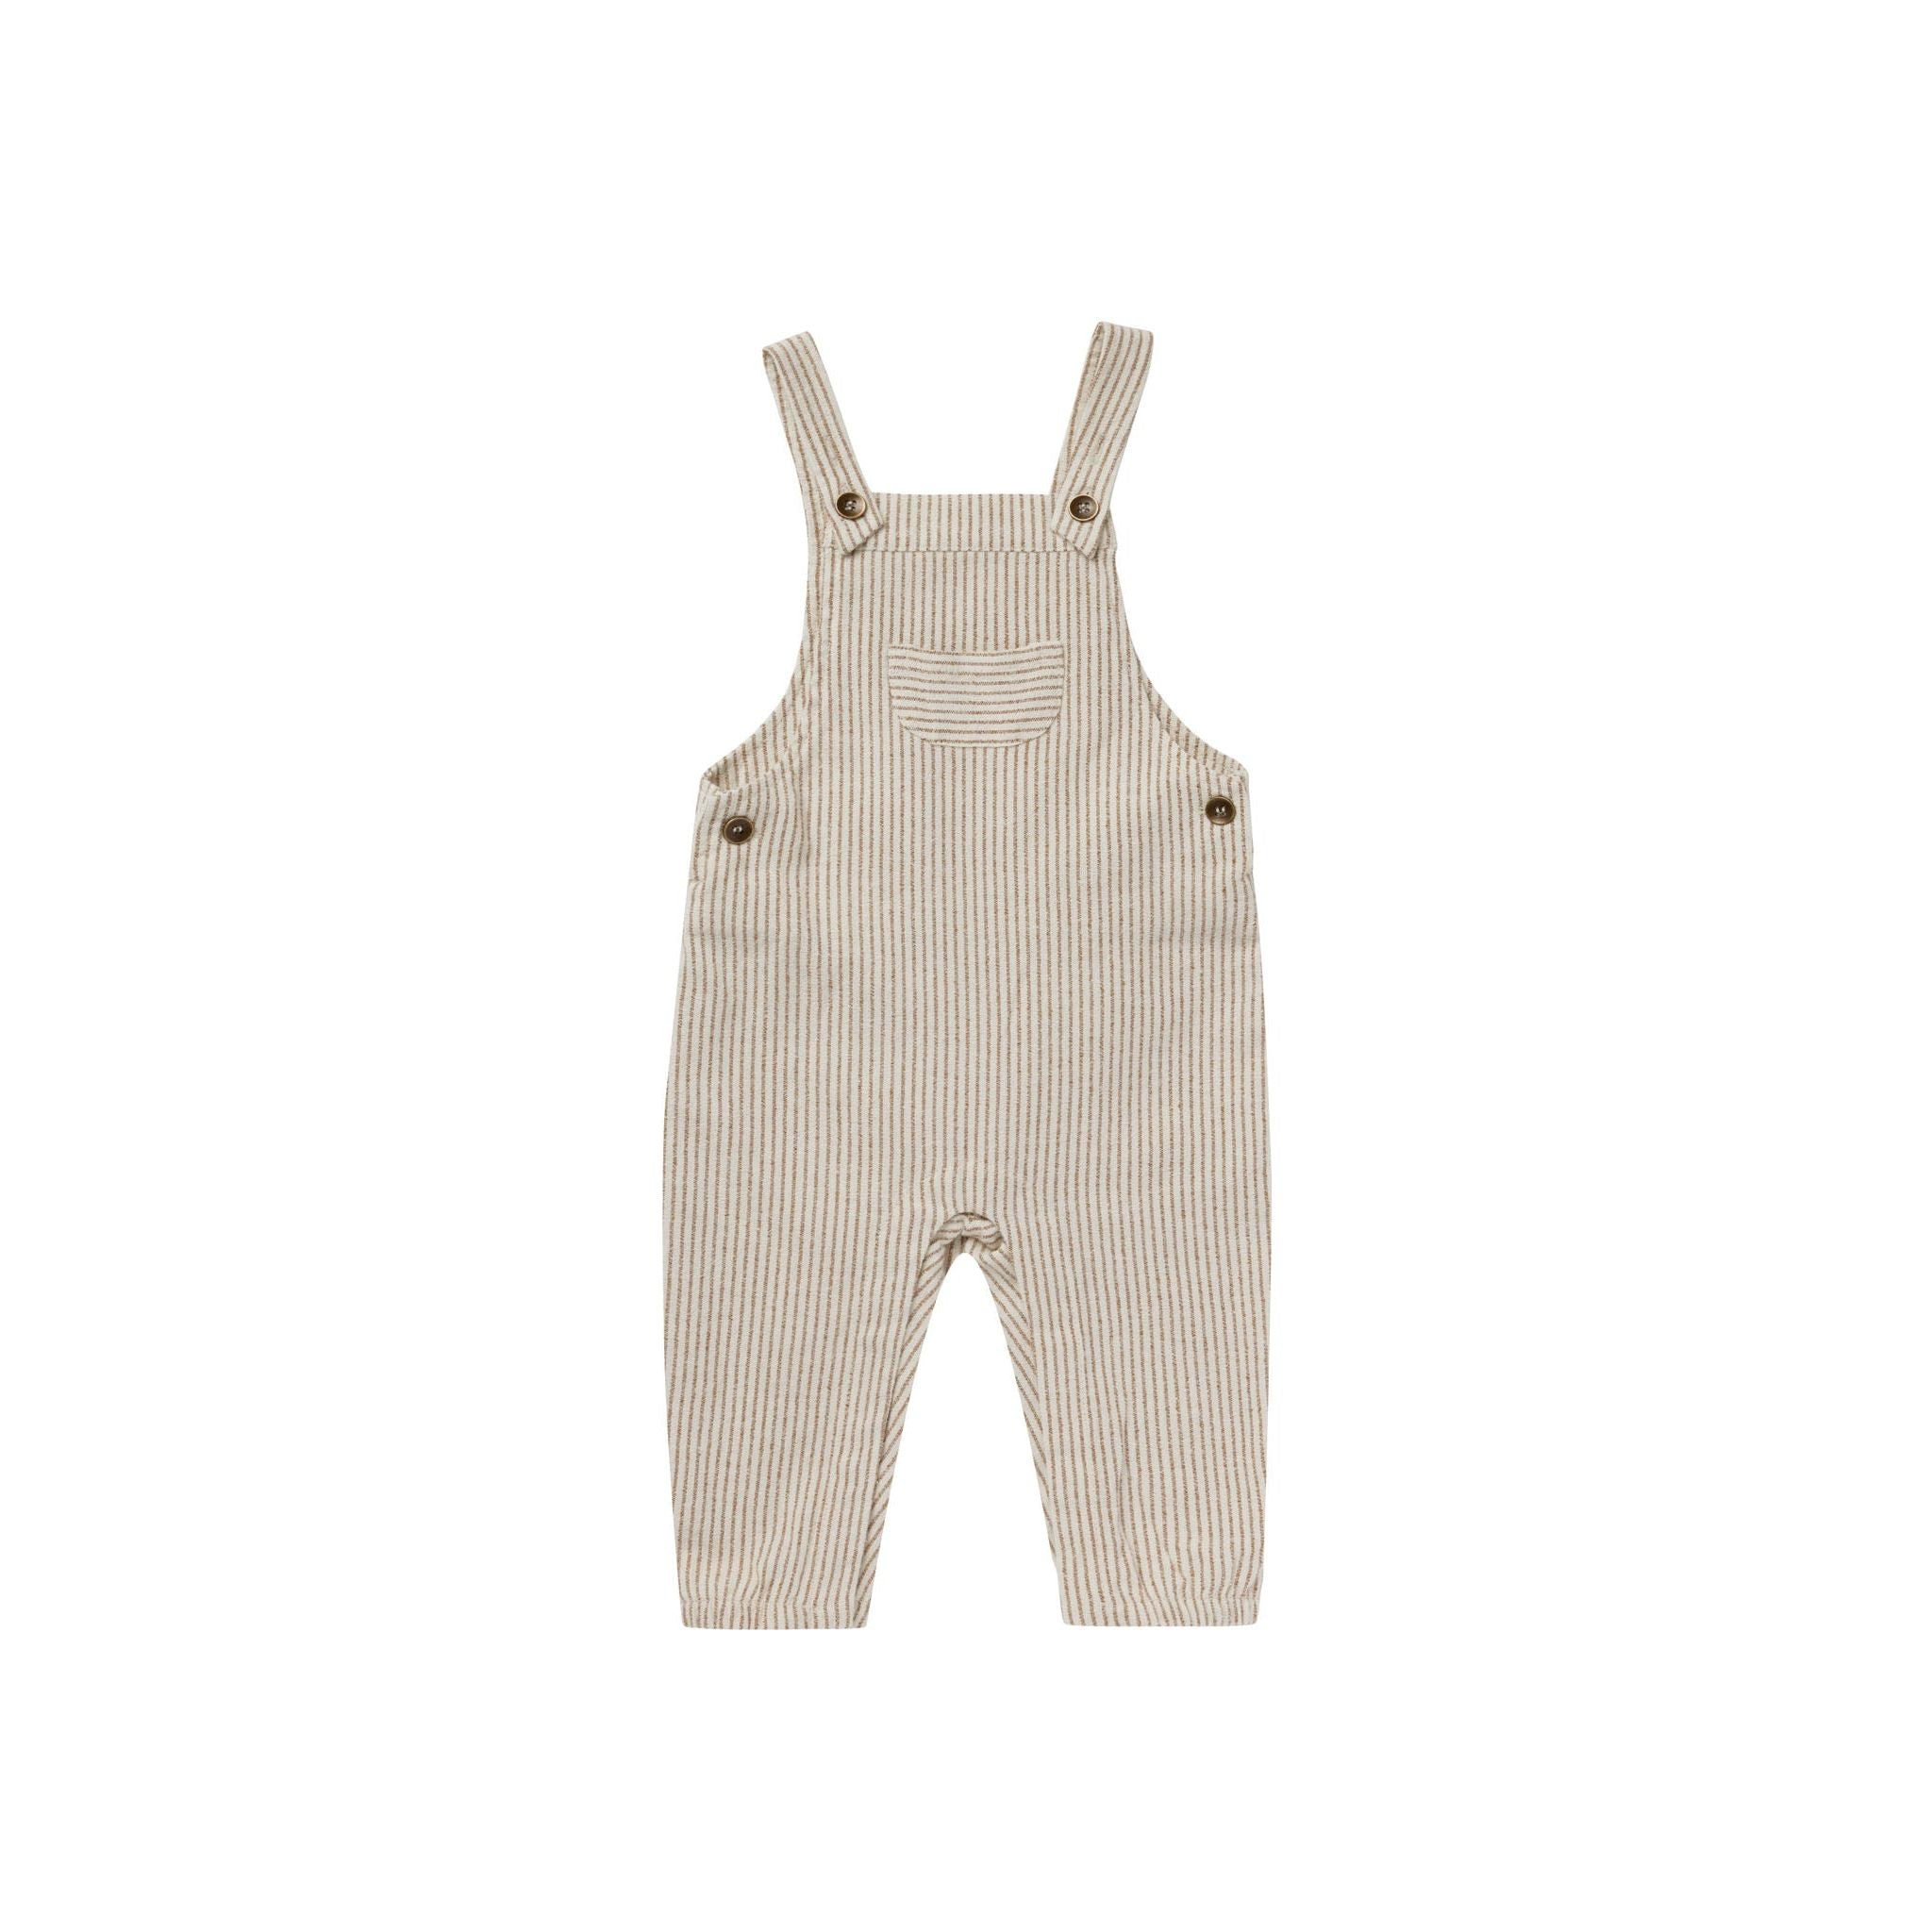 cream colored overalls with brass pinstripes